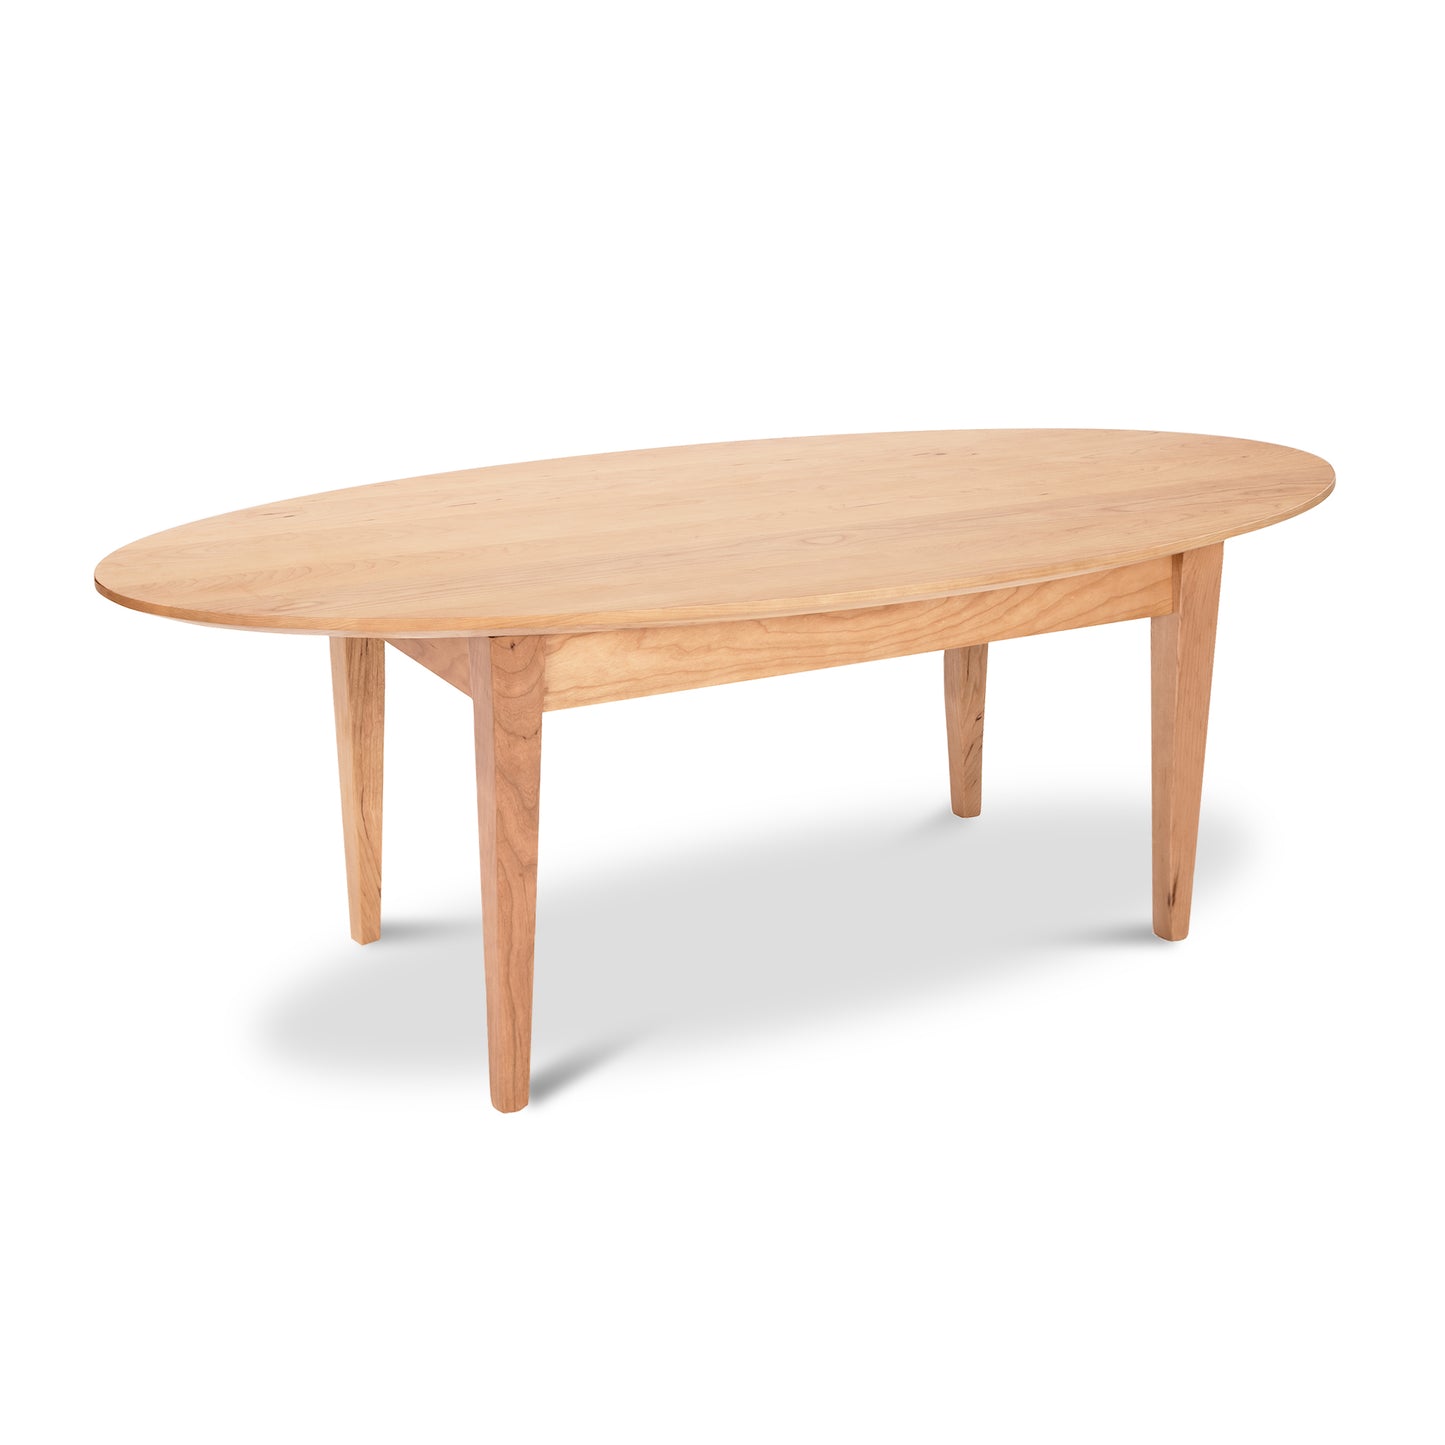 A Lyndon Furniture Classic Shaker Oval Coffee Table on a white background.